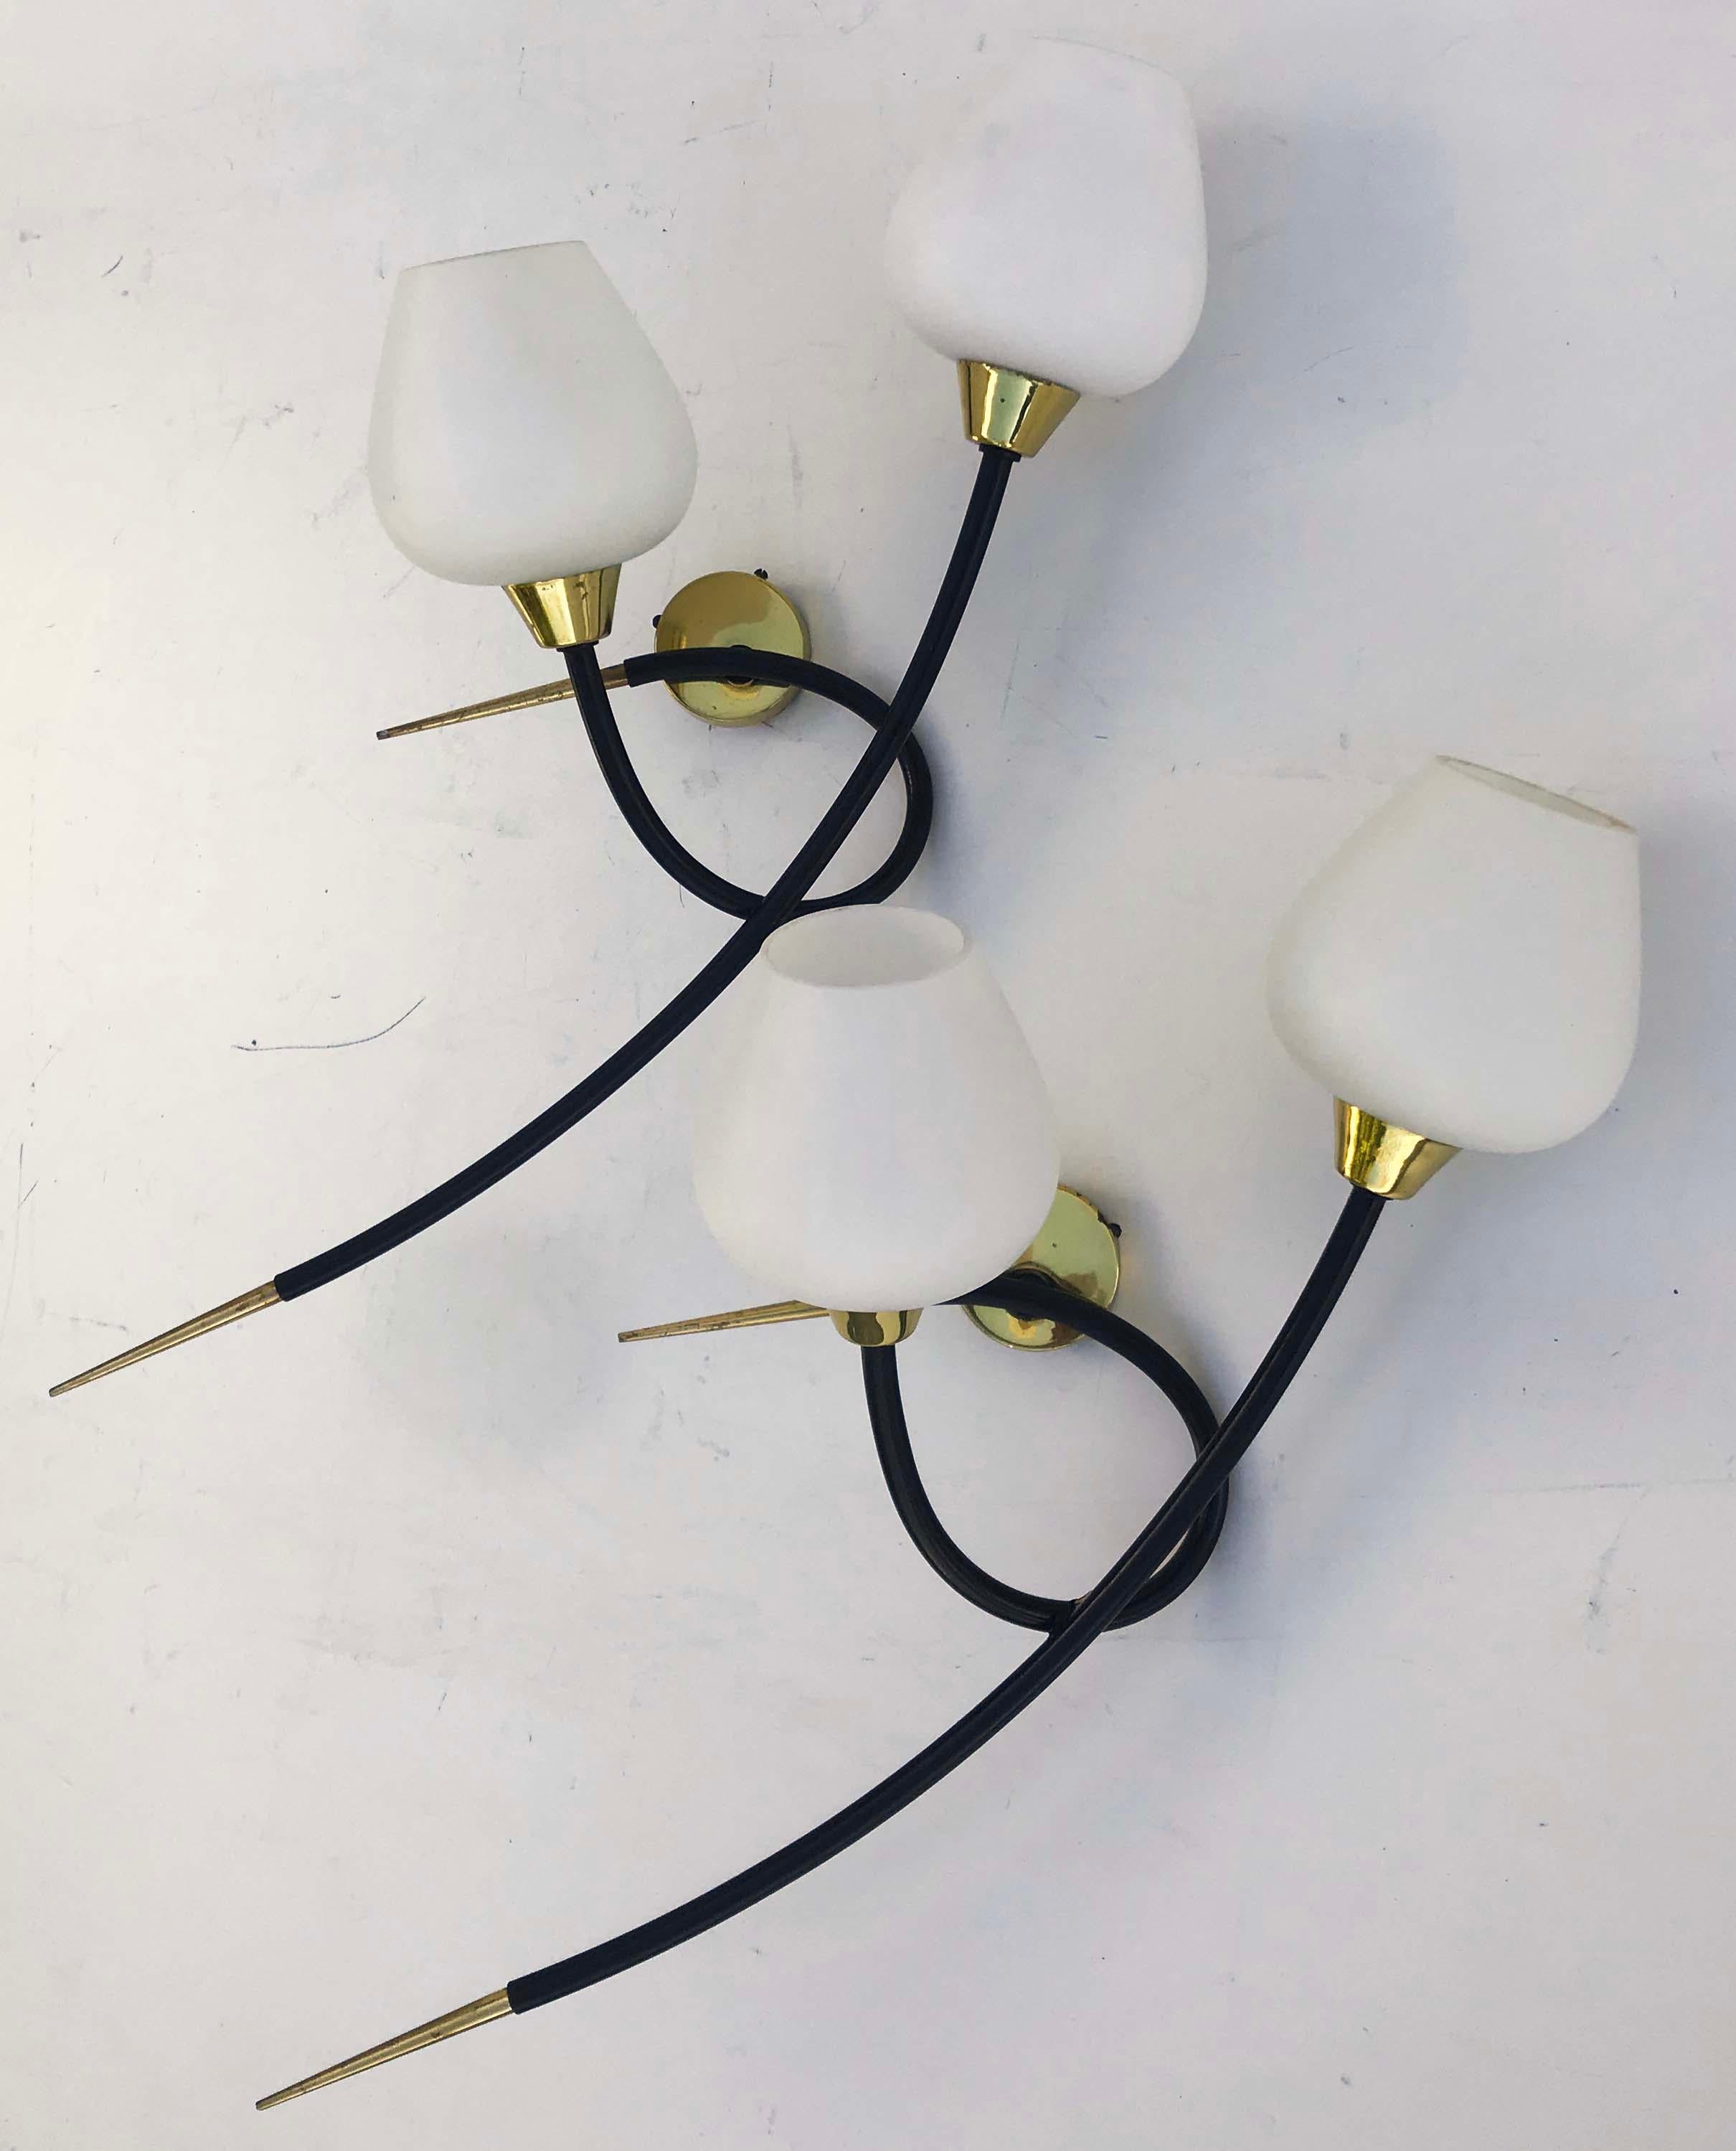 Superb pair of Maison Arlus sconces 
US rewired and in working condition.
2 lights , 25 watts max bulb.
Back plate: 2.5